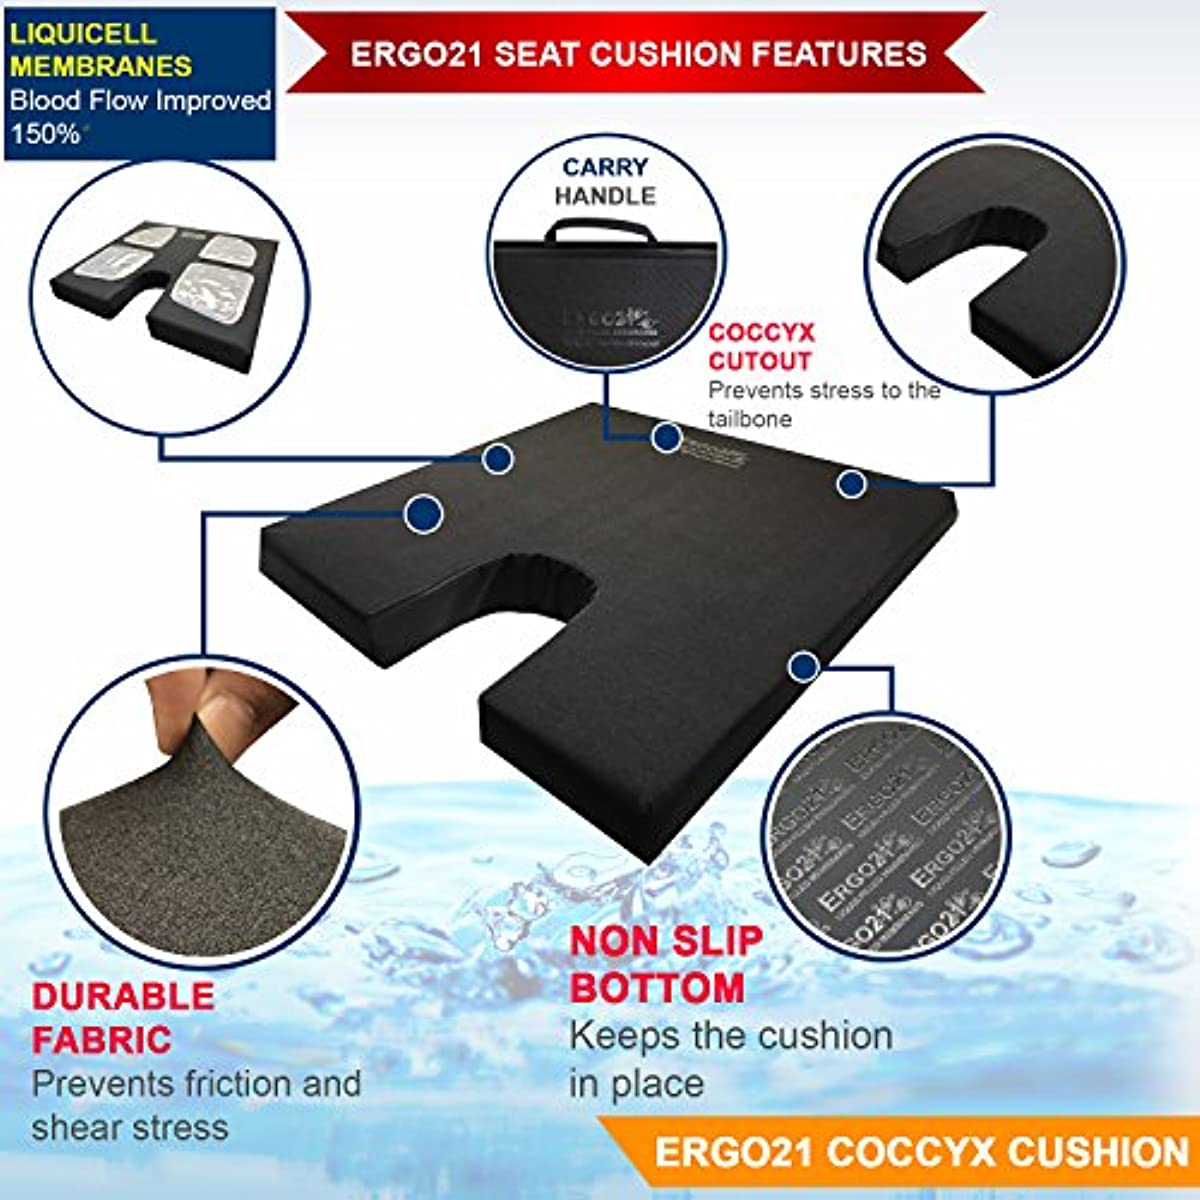 Ergo21 LiquiCell Coccyx Seat Cushion for Wheelchair, Office Chair, Car, Tailbone Pain Relief, Lower Back & Sciatica Buttock Pain, Coccyx Pillow for Sitting (17.5W x 15.5L x 2H)